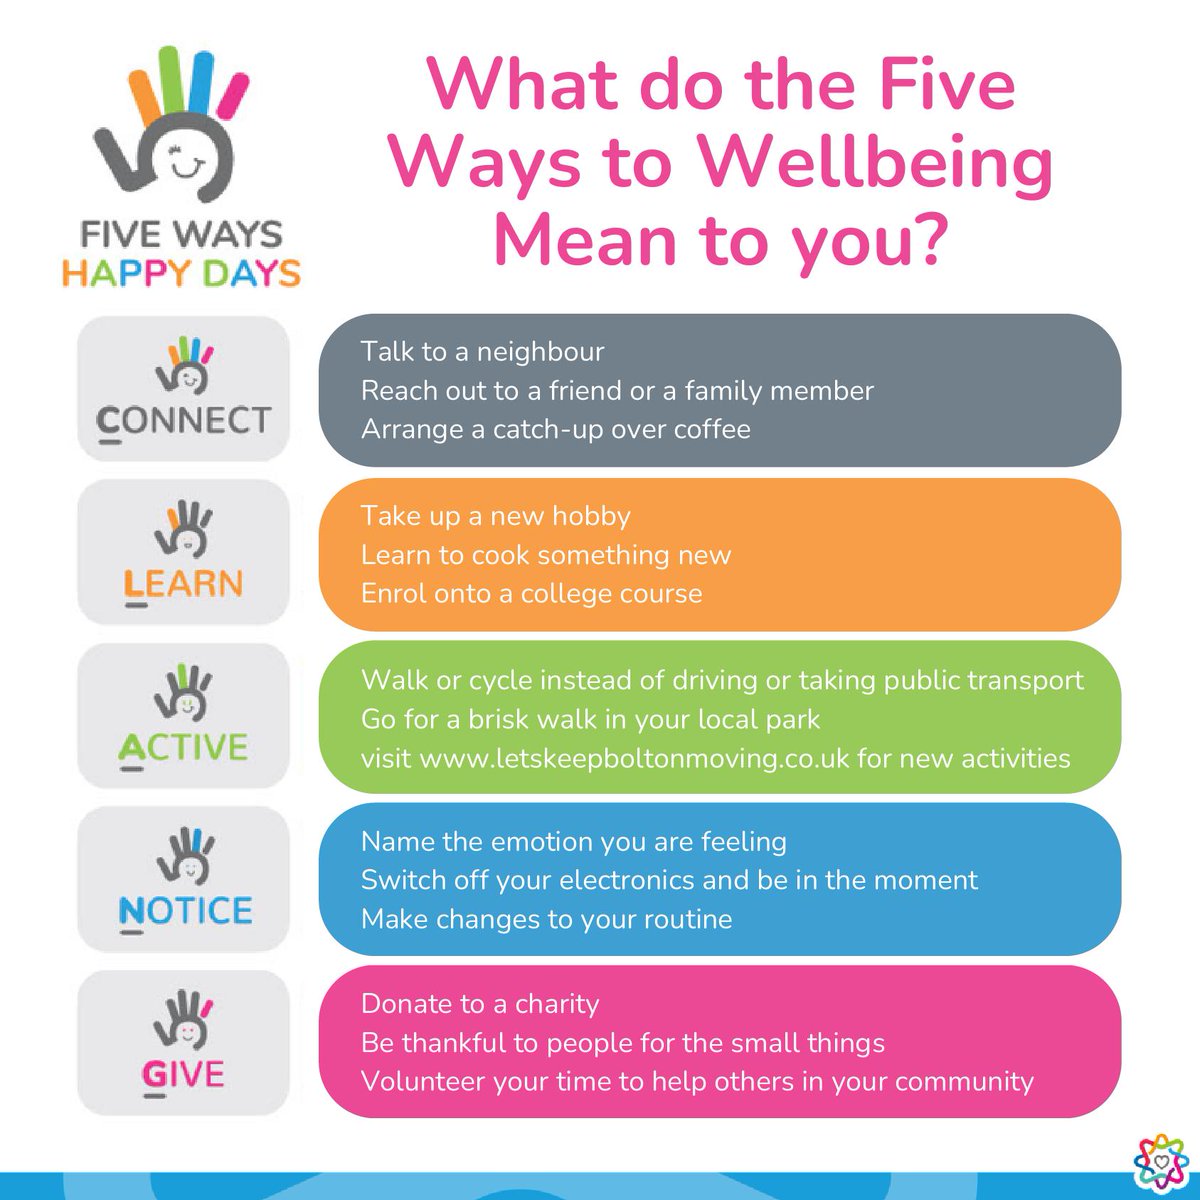 #StressAwarenessMonth🤯Have you done your #FiveADay?
Take a look at a few examples of how the #5WaystoWellbeing can help reduce your stress levels!
Visit letskeepboltonmoving.co.uk for more information around stress awareness, or speak to your local Mental Health Community Champion!